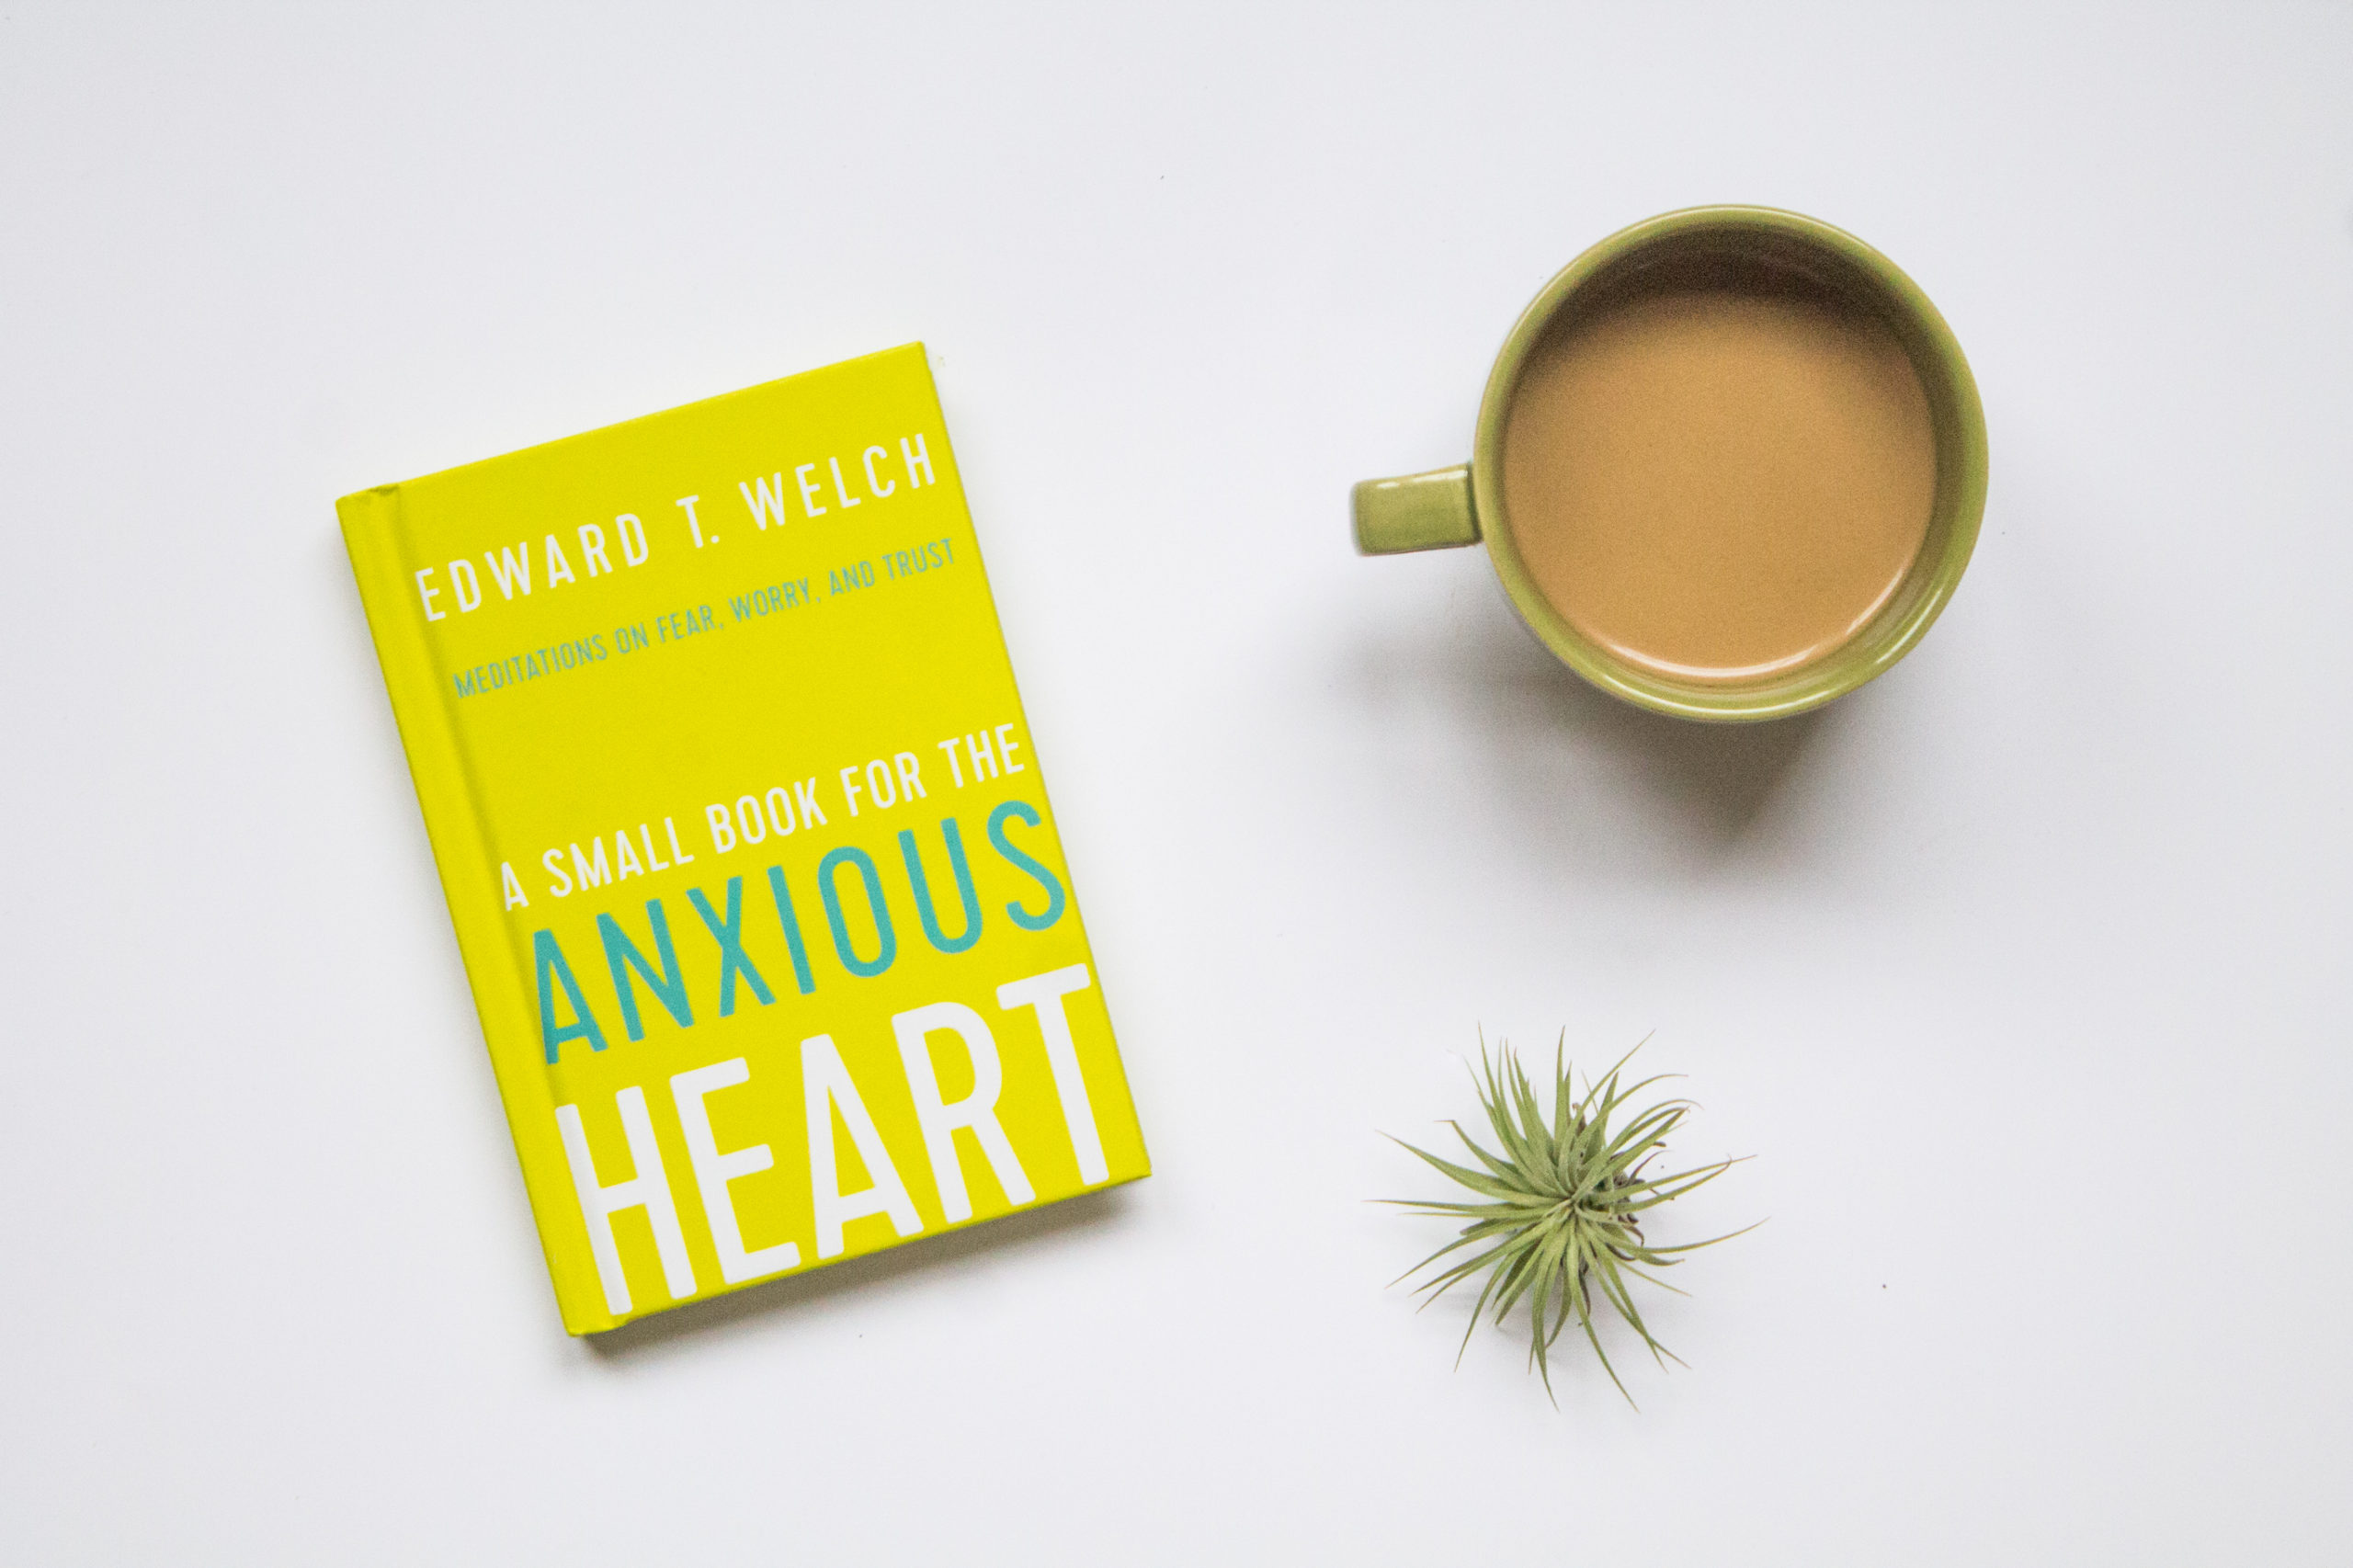 A Small Book for the Anxious Heart